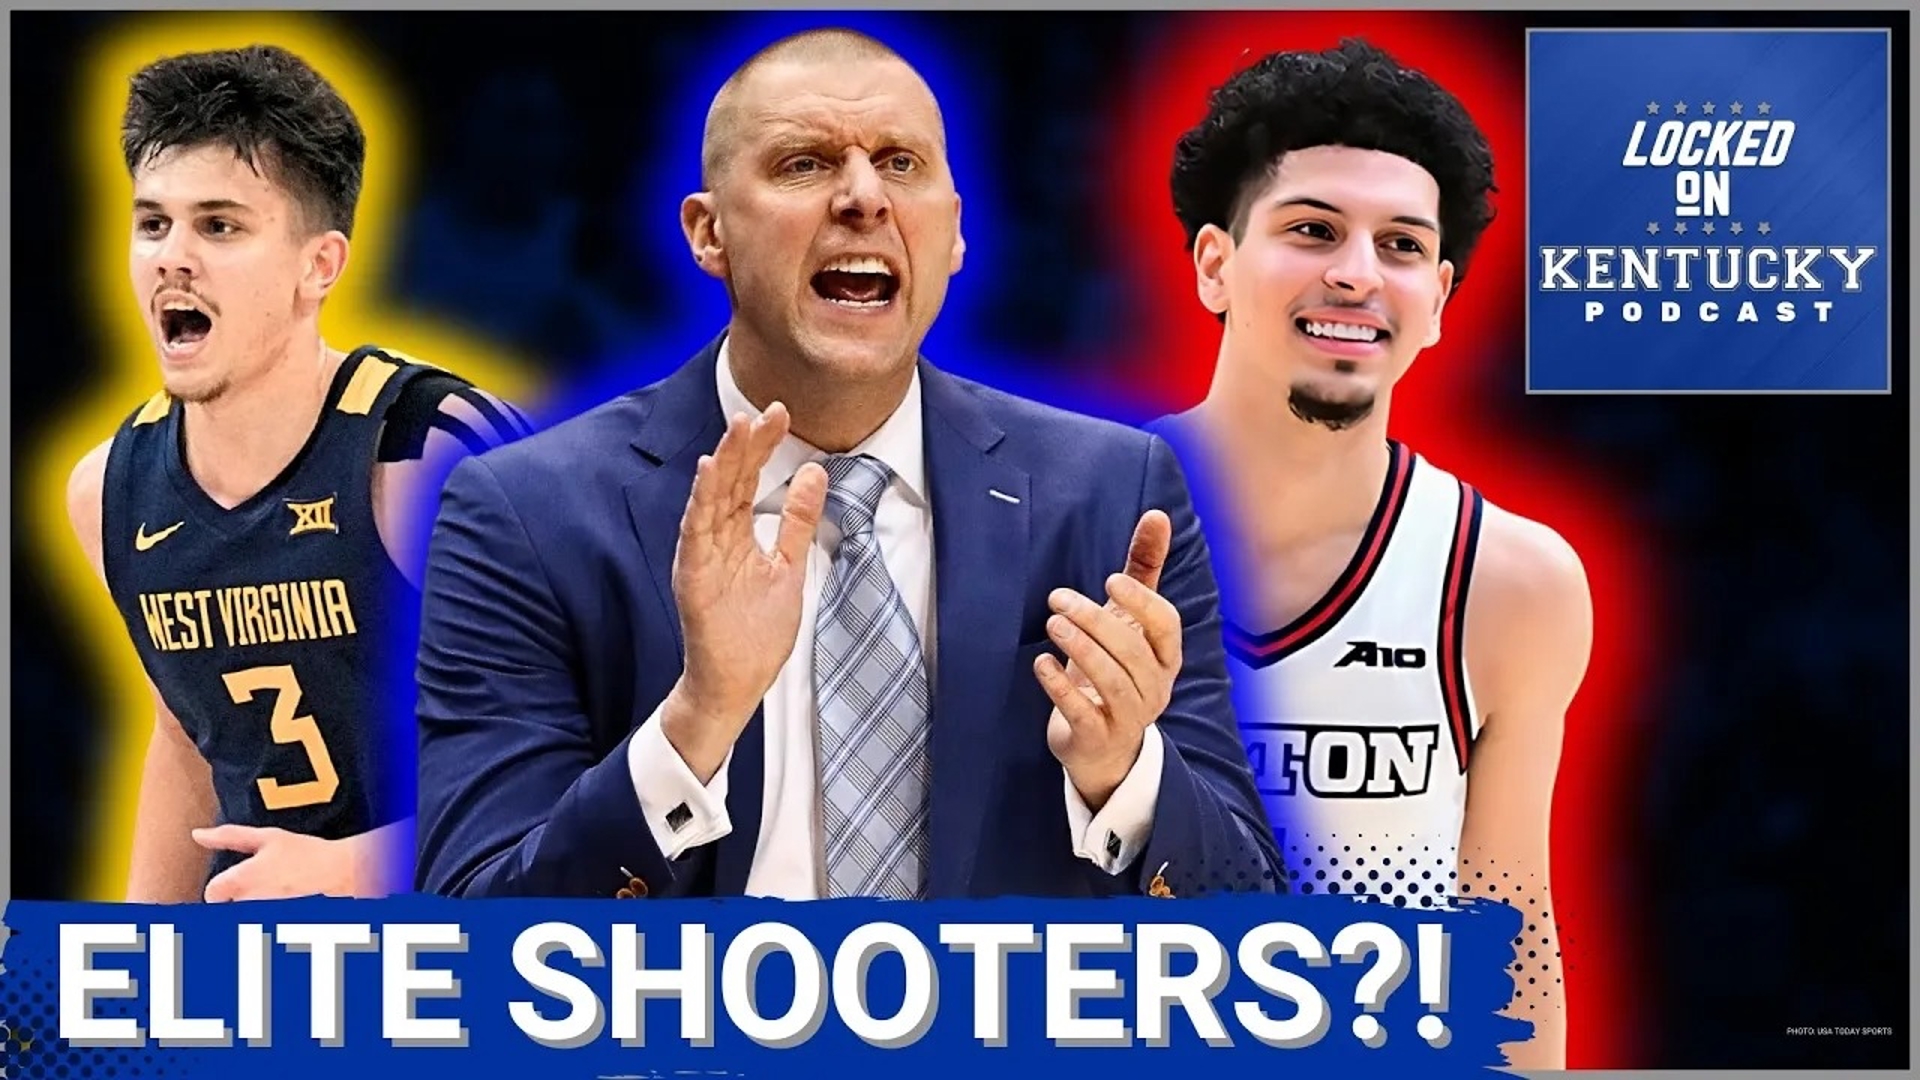 Kentucky basketball just landed two of the BEST SHOOTERS in the nation in  Koby Brea and Kerr Kriisa! | kcentv.com